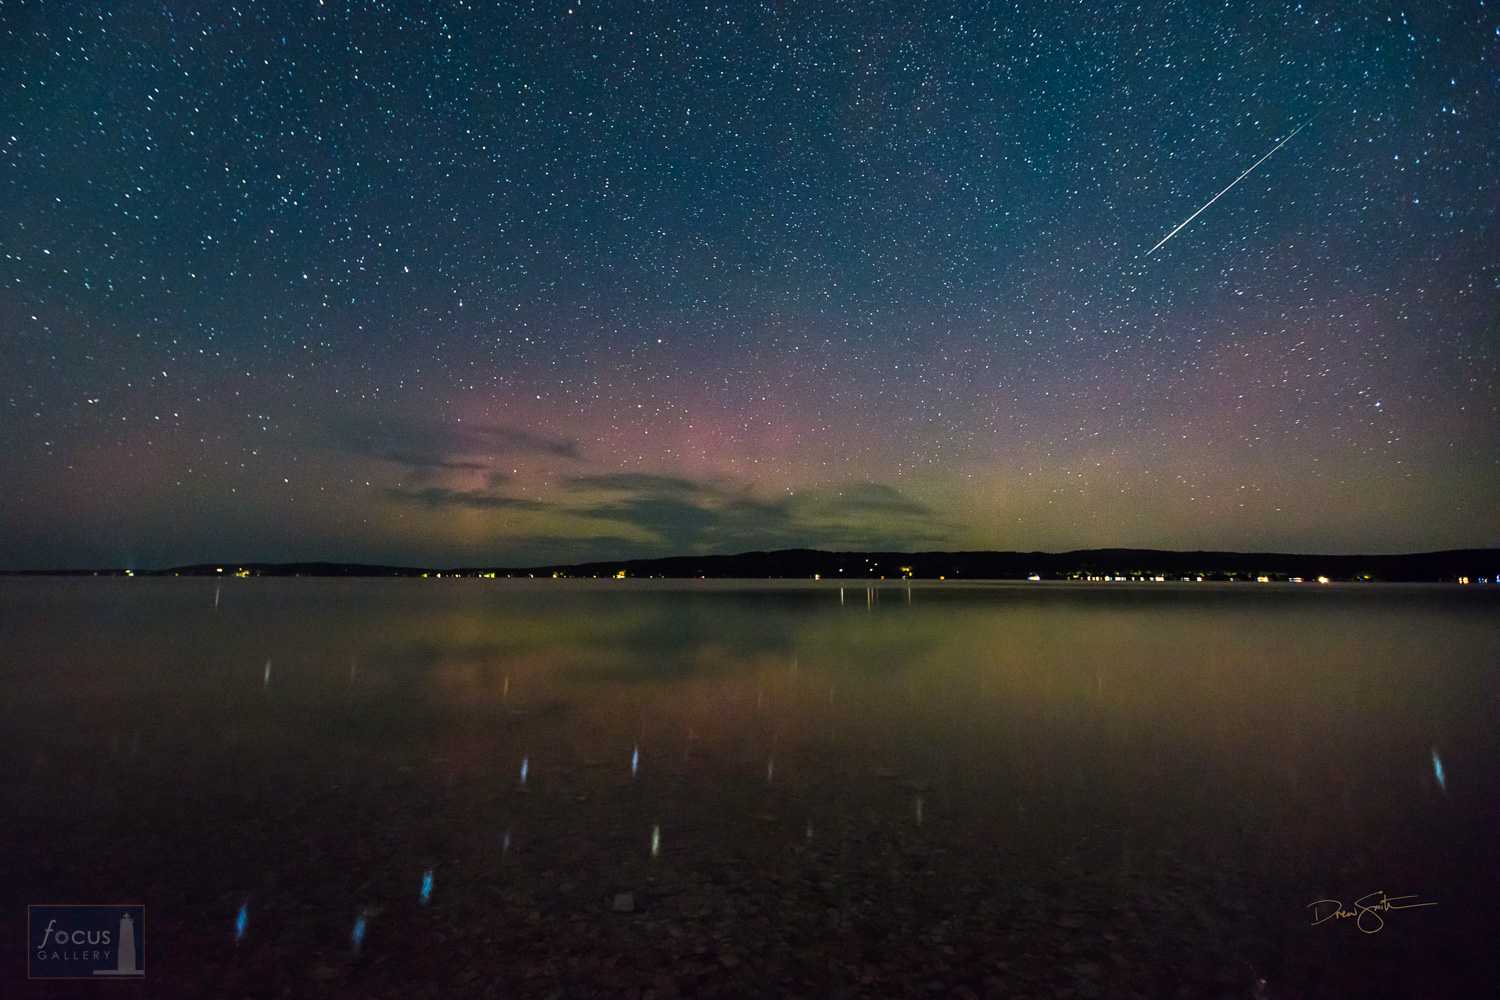 Starry skies with Big Dipper and a meteor reflecting on Crystal Lake with aurora borealis.